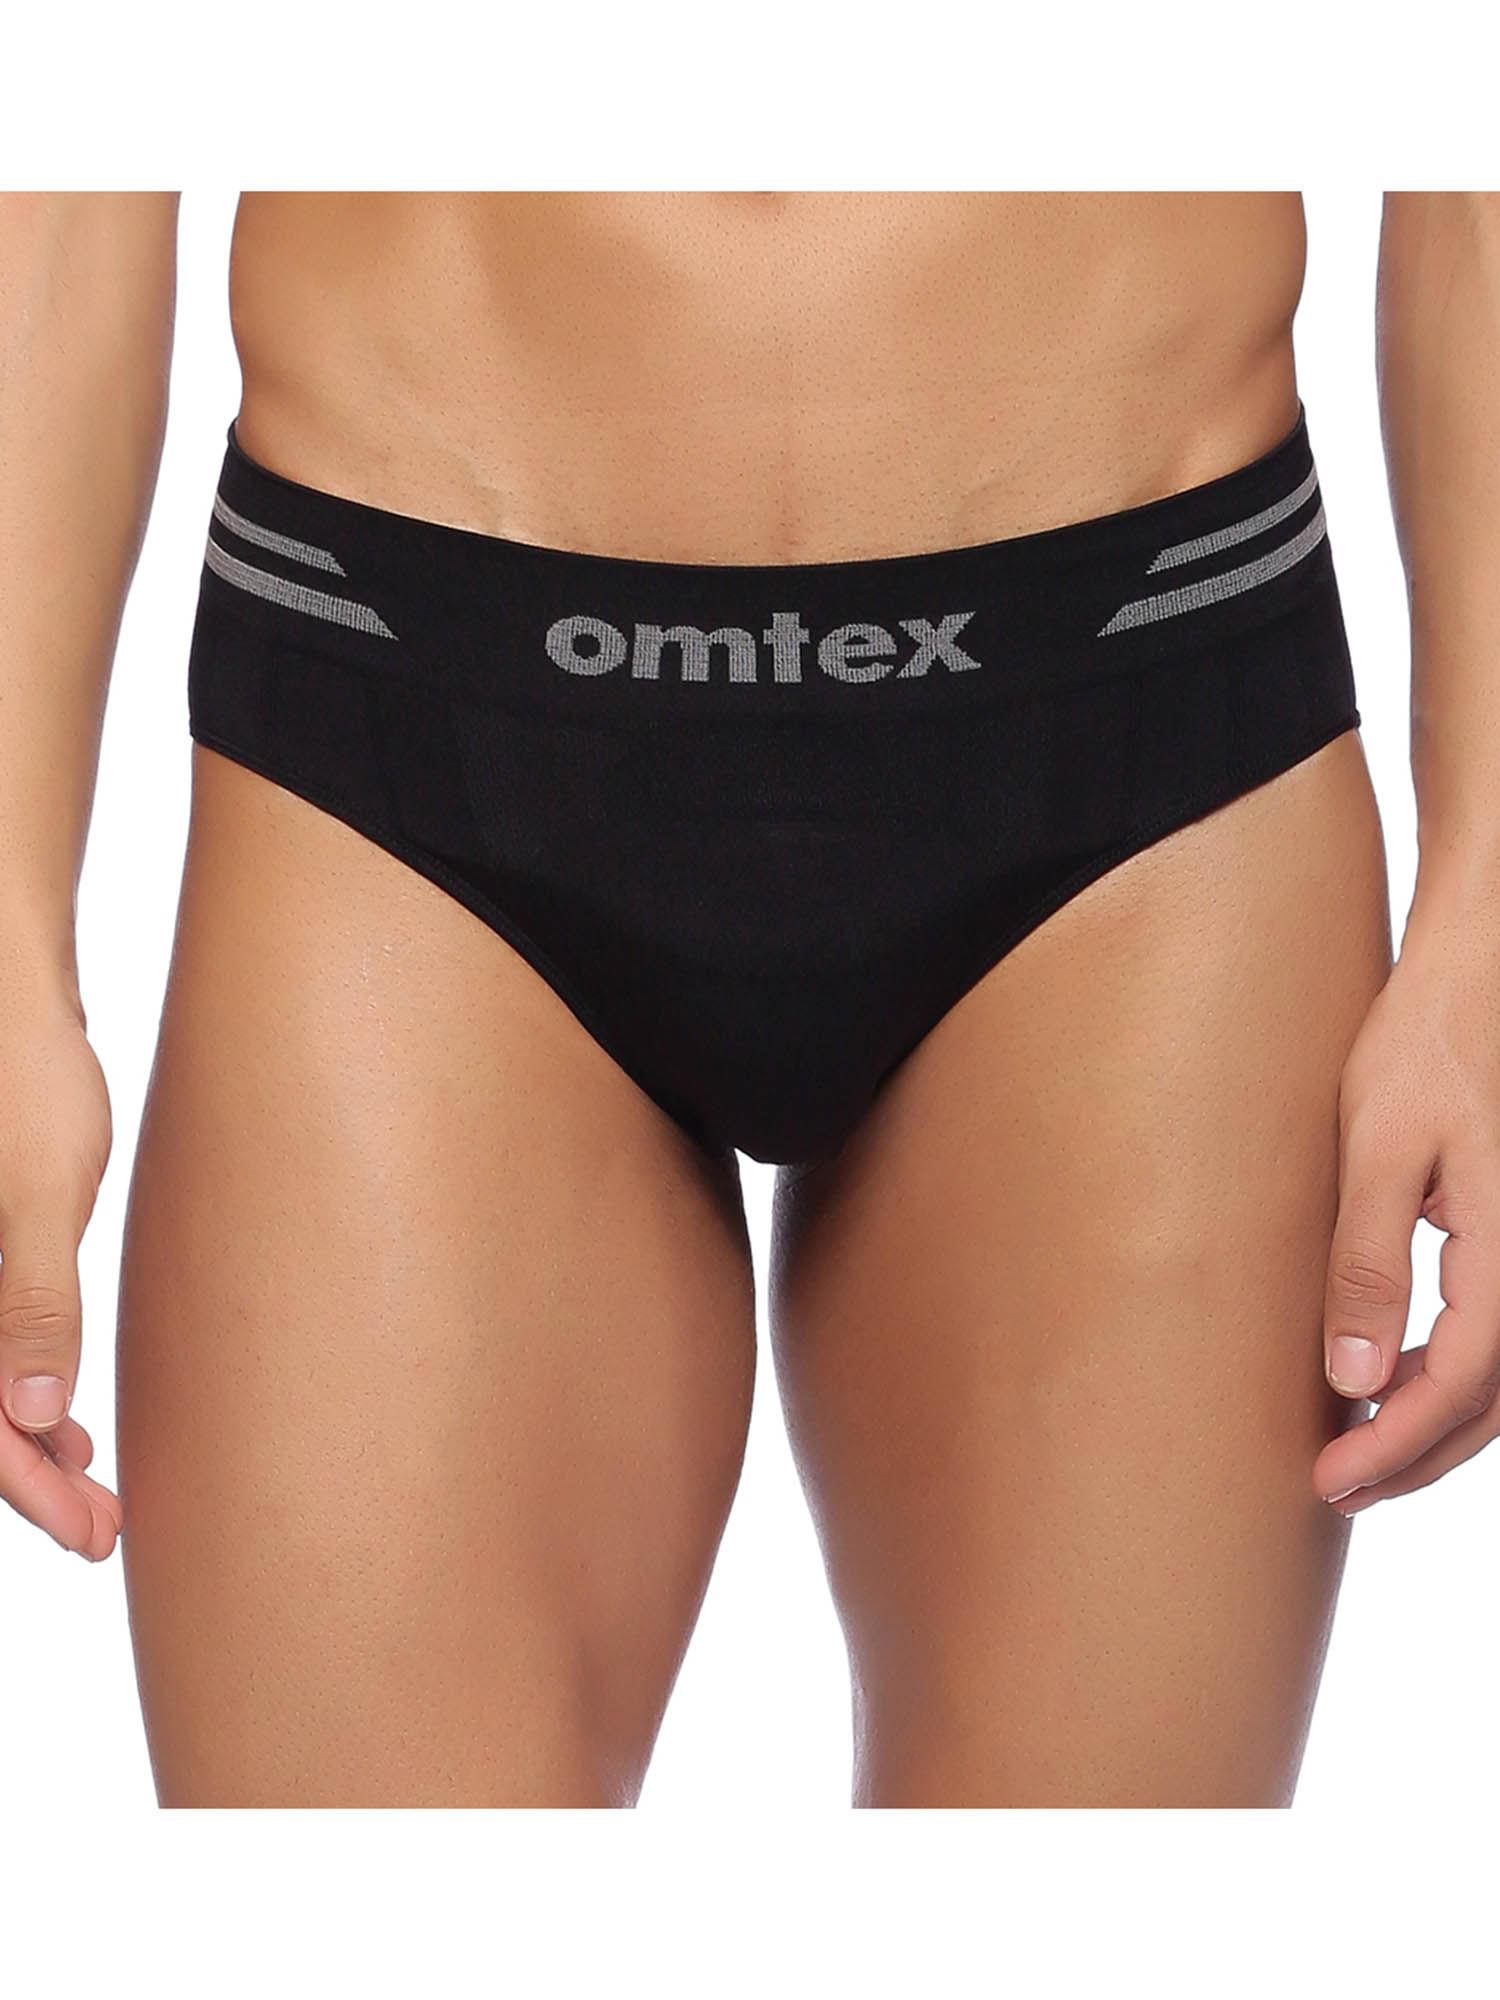 athletic-seamless-cotton-brief-full-covered---black